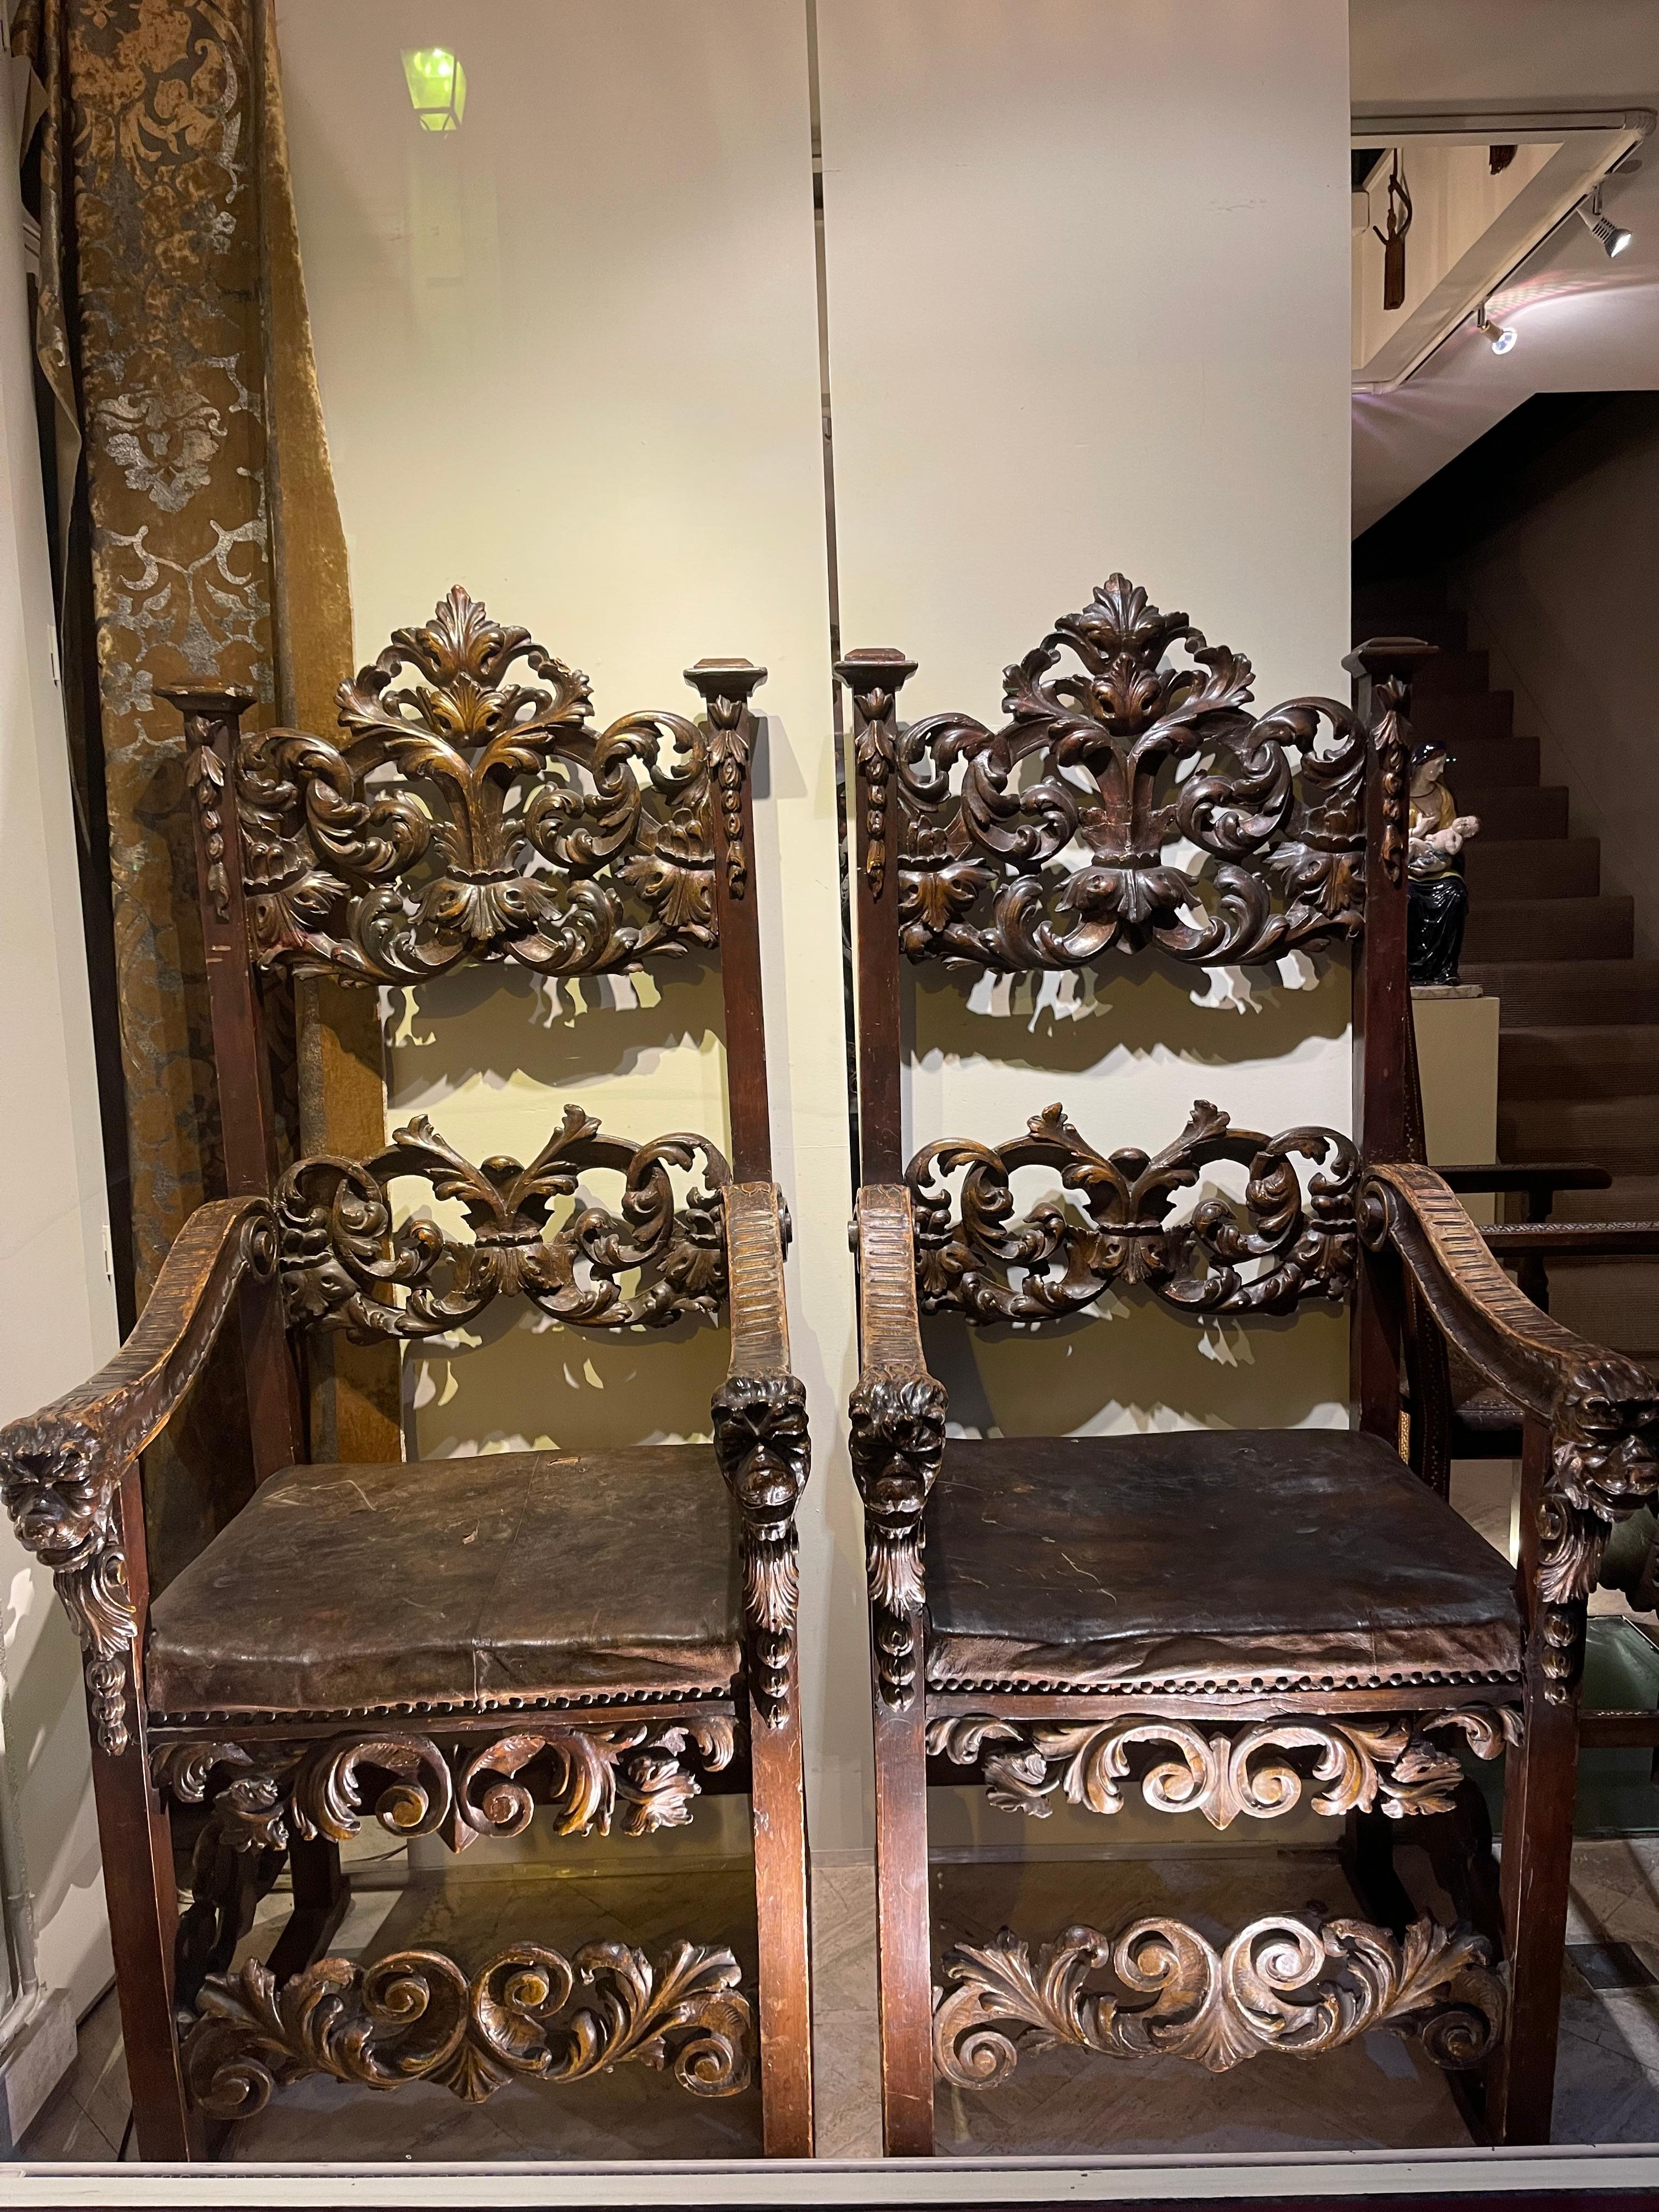 Exceptional pair of armchairs, in carved wood, decorated with acanthus leaves and volutes, the armrests ending in lions' heads, the footrests in dolphins' heads.
Traces of 